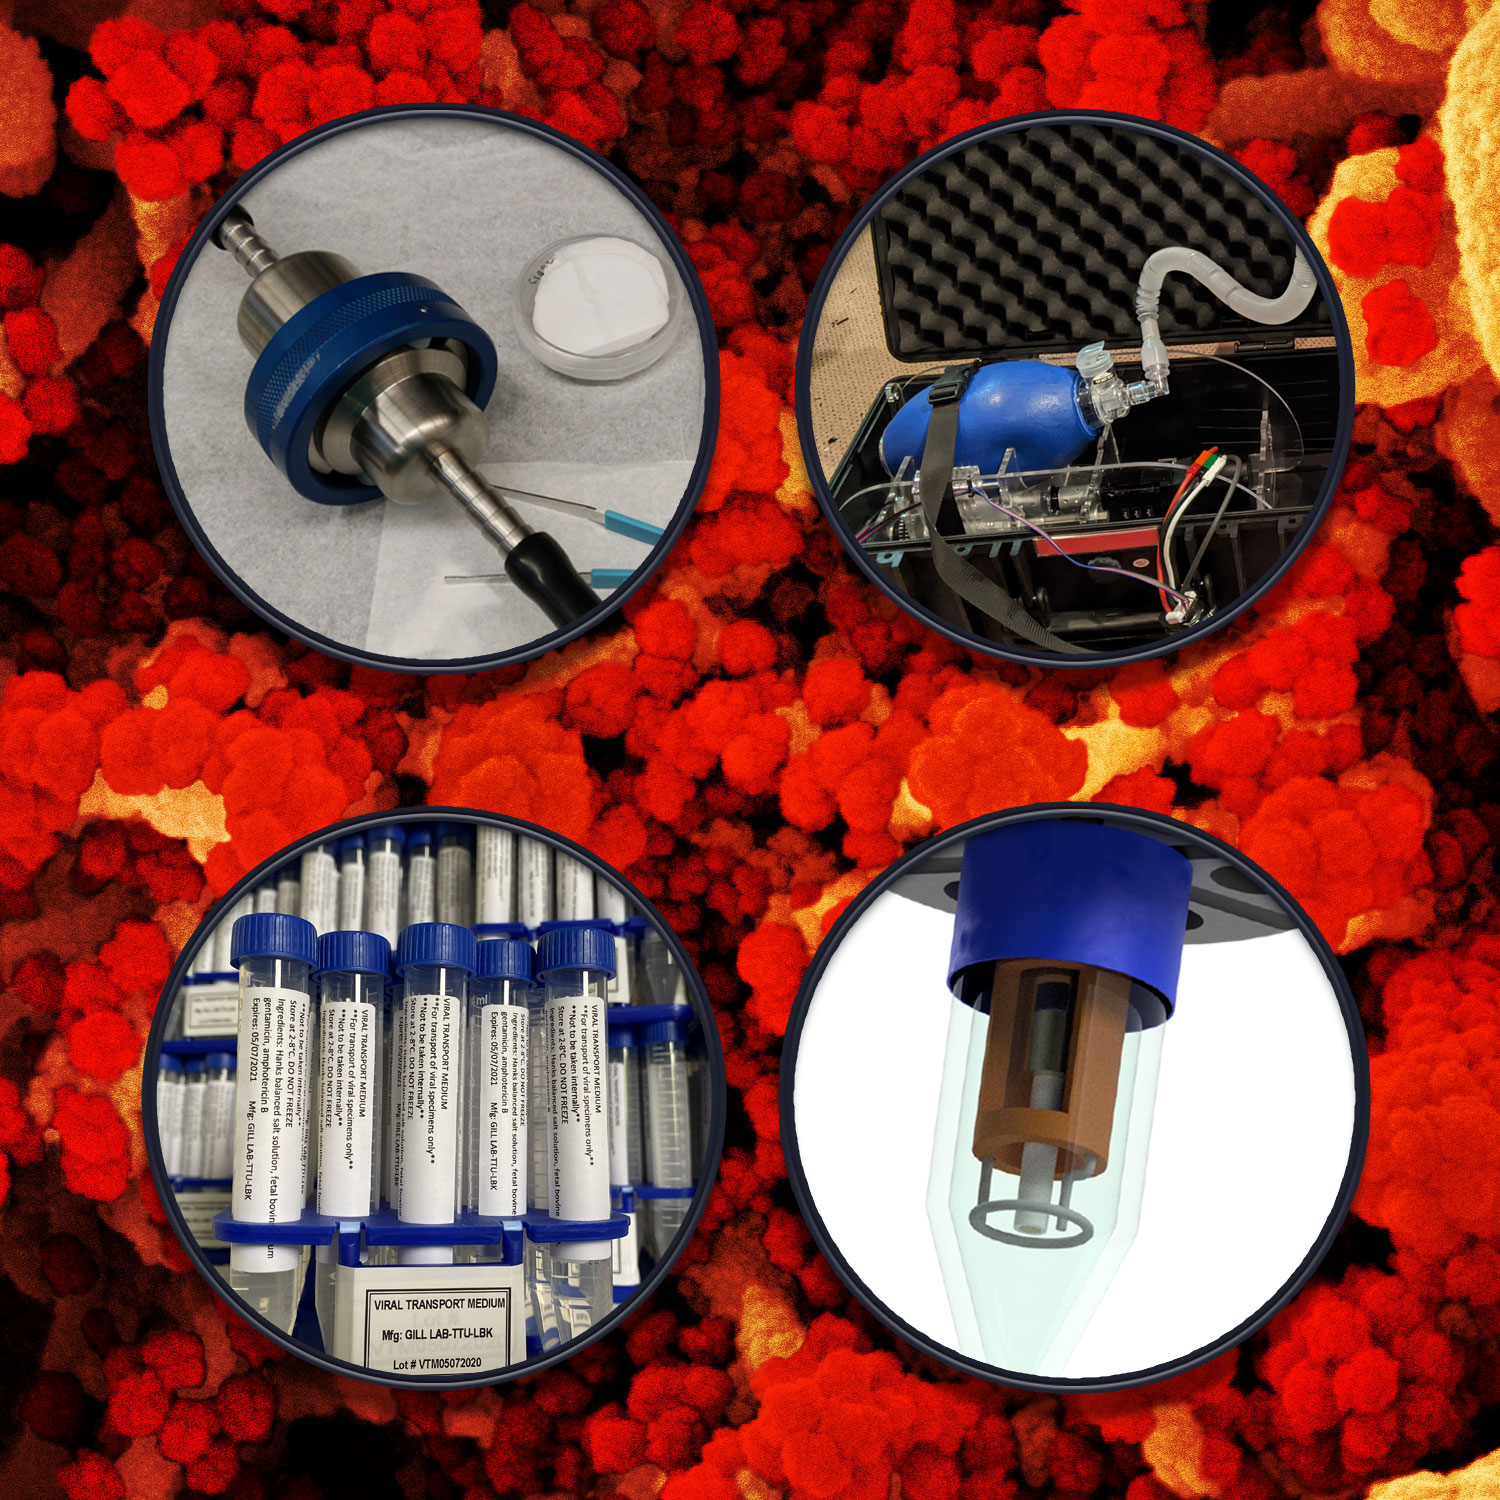 coronavirus background with photos of vials and equipment on top